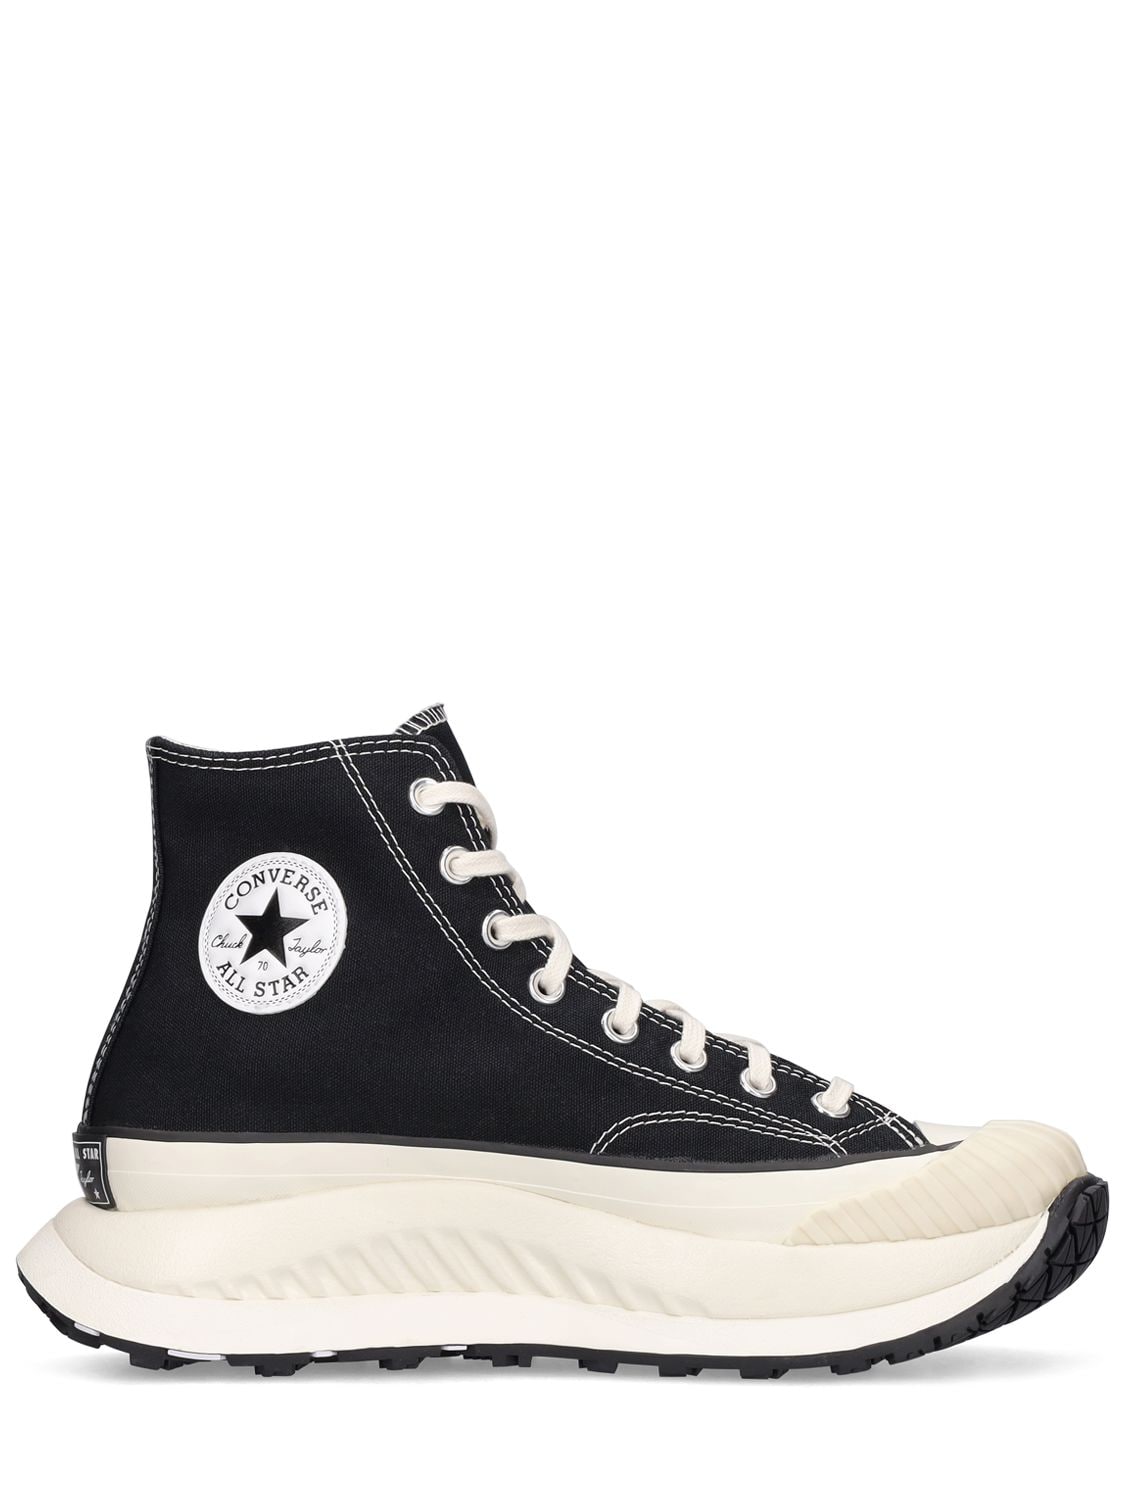 Image of Chuck 70 At-cx Platform High Sneakers